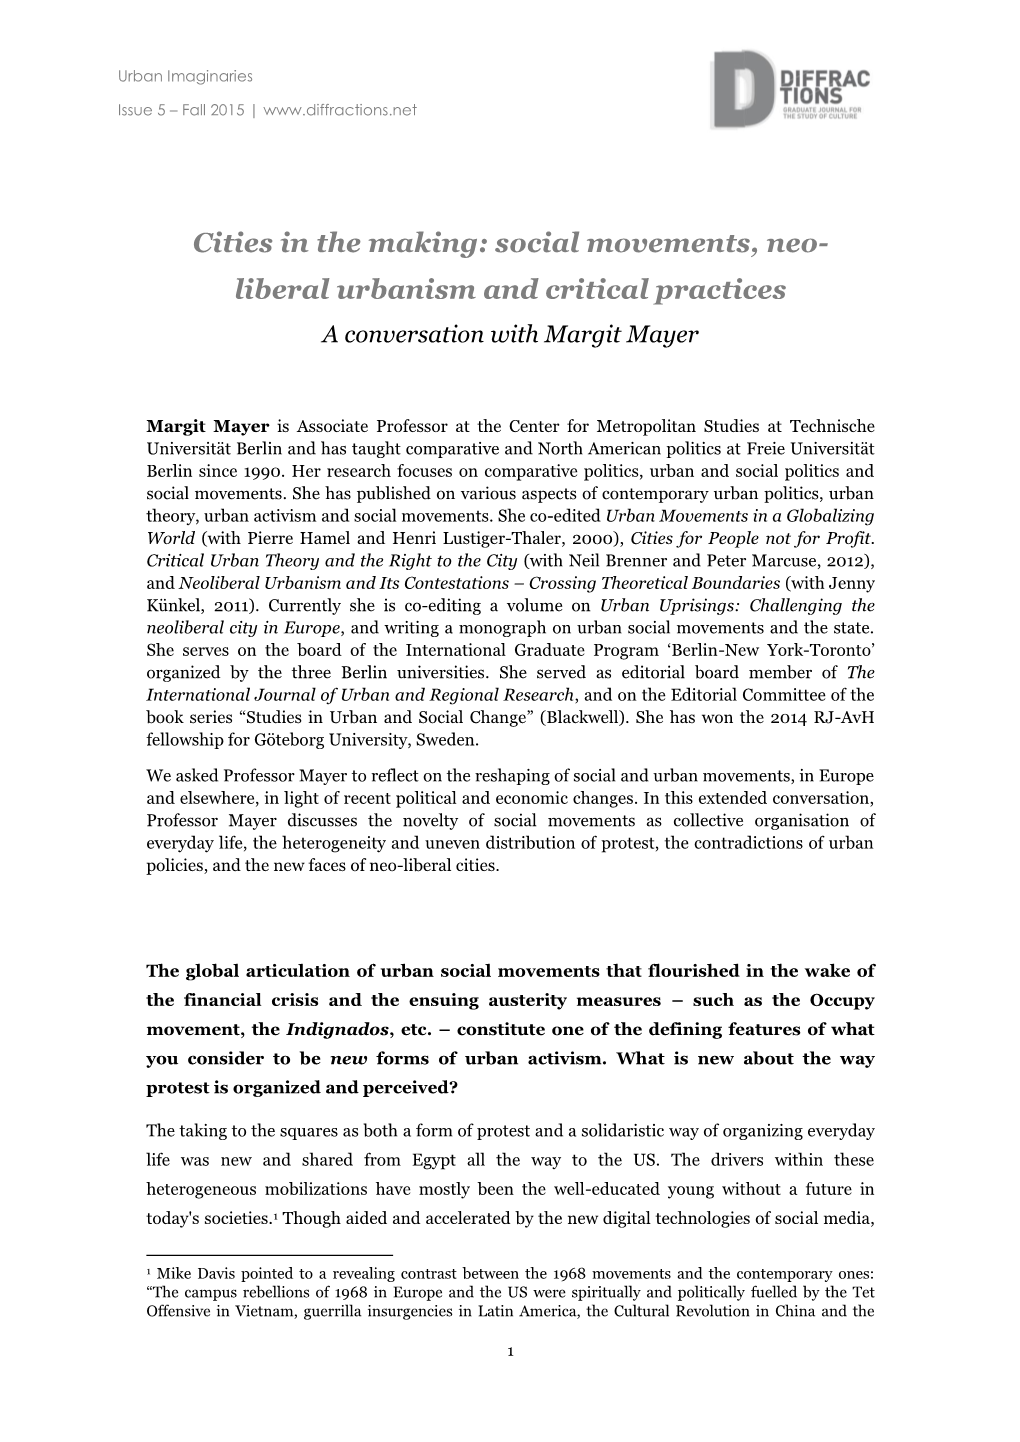 Liberal Urbanism and Critical Practices a Conversation with Margit Mayer